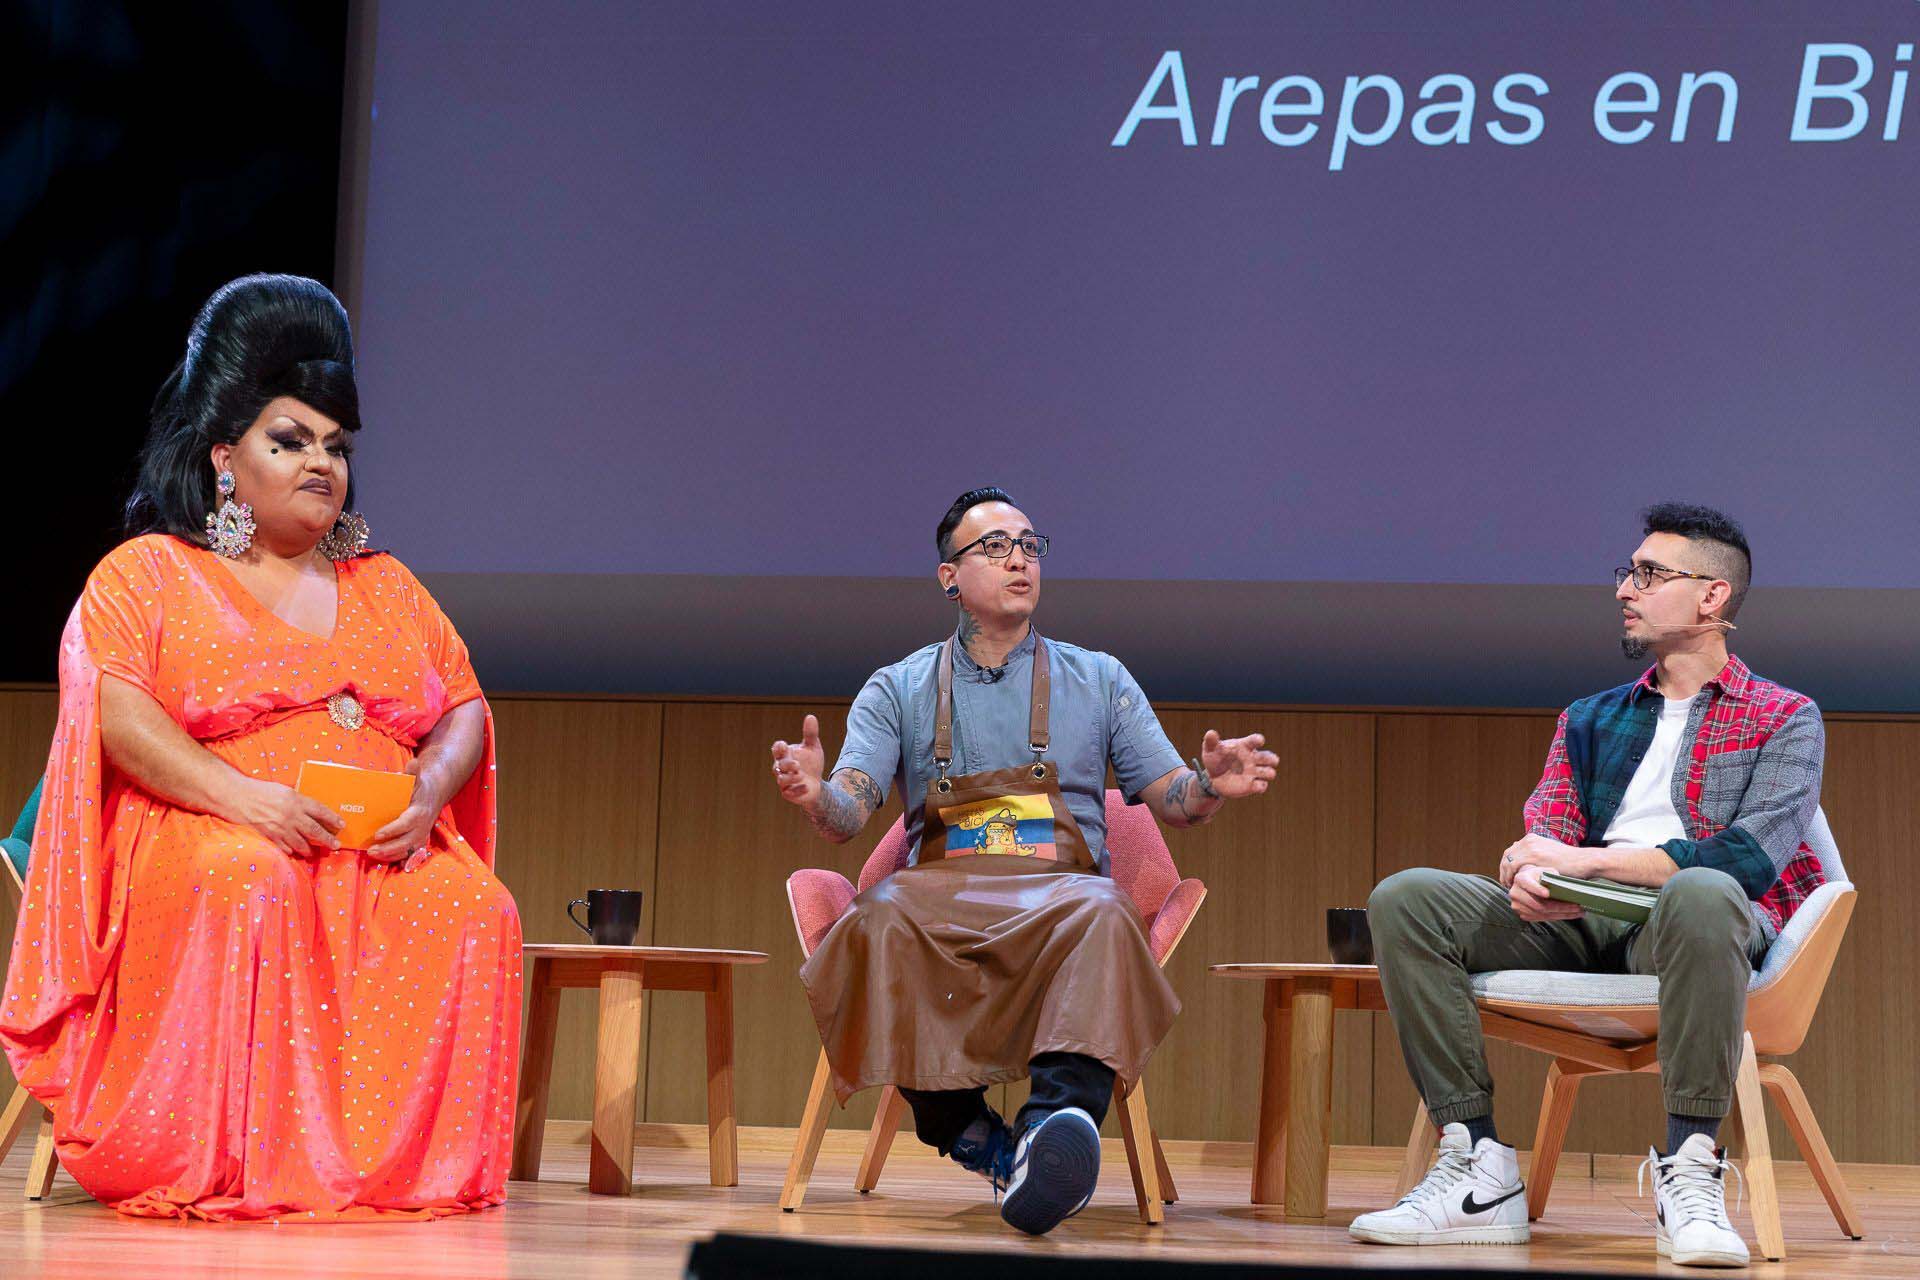 A drag performer in a bright orange dress, a chef wearing glasses, and a journalist in white sneakers sit on stage. The words "Arepas en Bici" are projected onto the screen behind them.